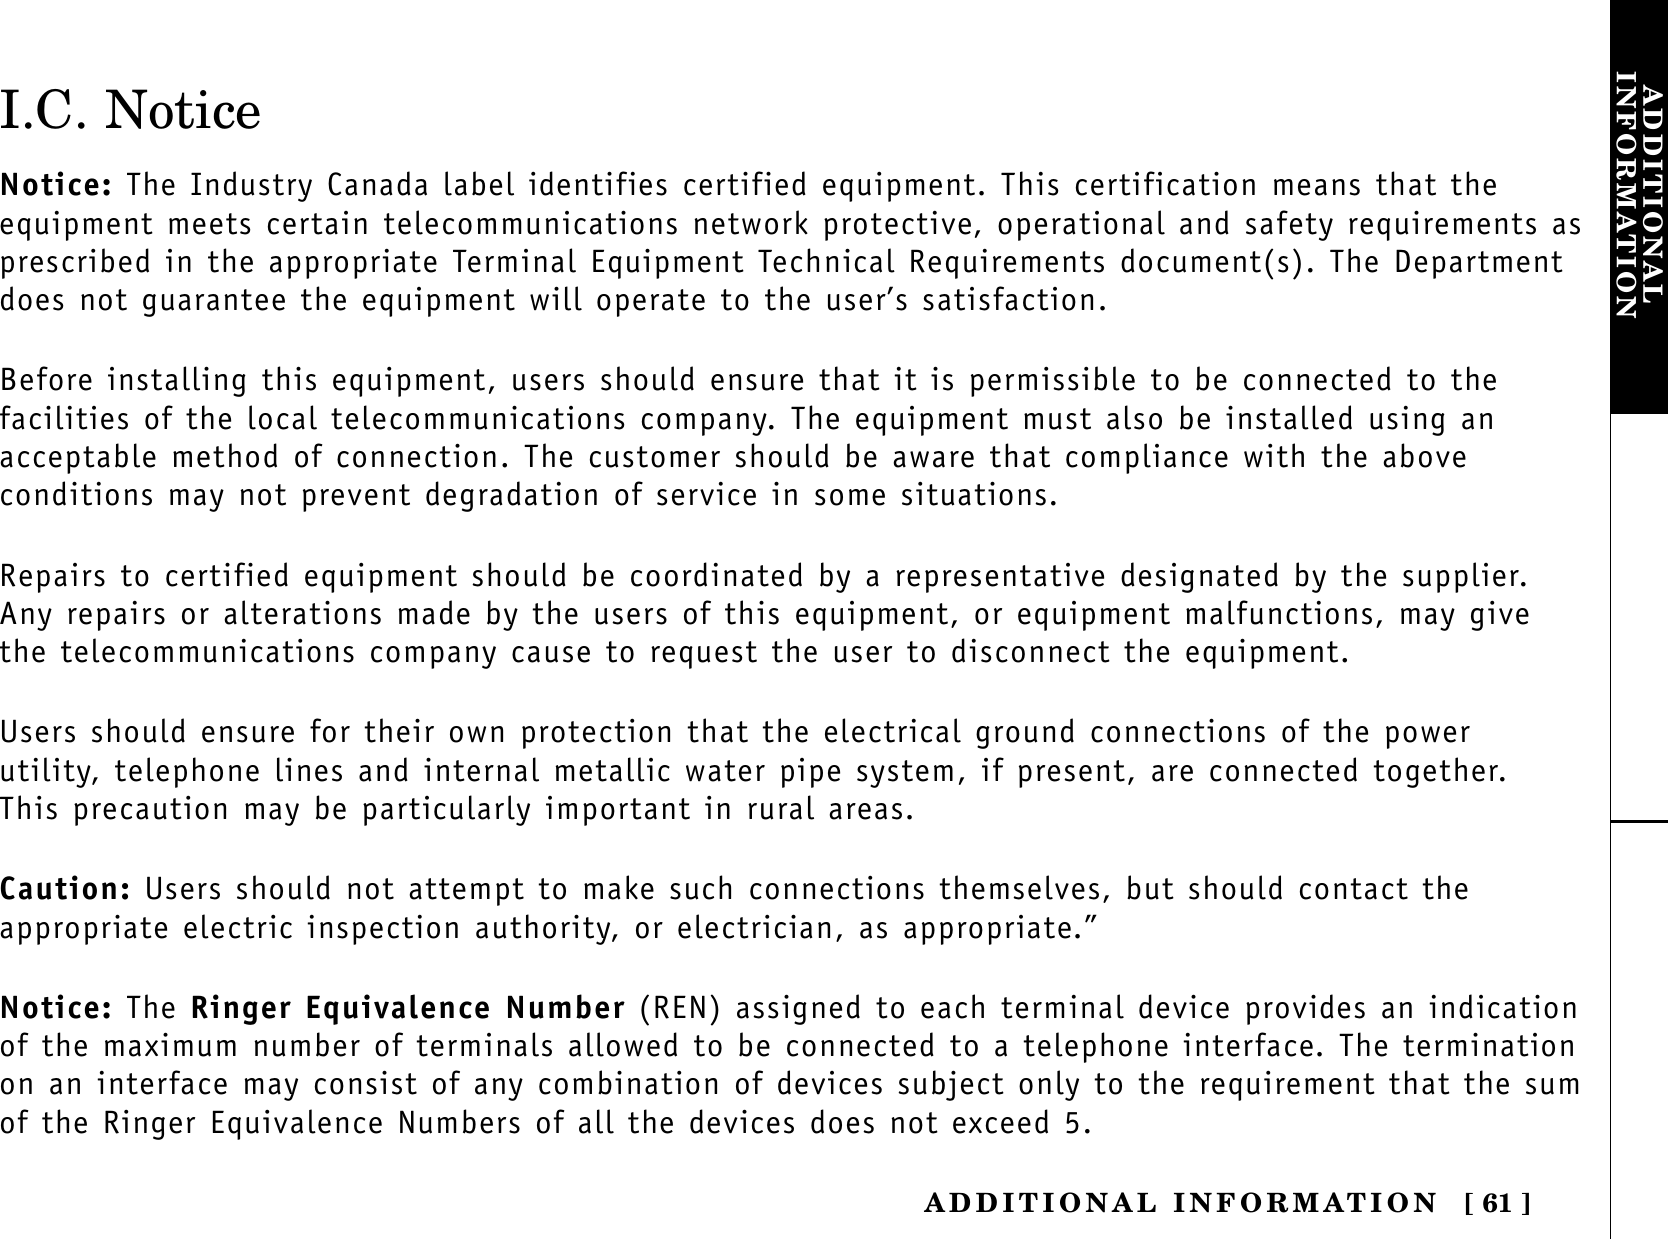 ADDITIONAL INFORMATION [ 61 ]ADDITIONALINFORMATIONI.C. NoticeNotice: The Industry Canada label identifies certified equipment. This certification means that the equipment meets certain telecommunications network protective, operational and safety requirements asprescribed in the appropriate Terminal Equipment Technical Requirements document(s). The Departmentdoes not guarantee the equipment will operate to the user’s satisfaction.Before installing this equipment, users should ensure that it is permissible to be connected to the facilities of the local telecommunications company. The equipment must also be installed using an acceptable method of connection. The customer should be aware that compliance with the above conditions may not prevent degradation of service in some situations.Repairs to certified equipment should be coordinated by a representative designated by the supplier. Any repairs or alterations made by the users of this equipment, or equipment malfunctions, may give the telecommunications company cause to request the user to disconnect the equipment.Users should ensure for their own protection that the electrical ground connections of the powerutility, telephone lines and internal metallic water pipe system, if present, are connected together. This precaution may be particularly important in rural areas.Caution: Users should not attempt to make such connections themselves, but should contact the appropriate electric inspection authority, or electrician, as appropriate.”Notice: The Ringer Equivalence Number (REN) assigned to each terminal device provides an indicationof the maximum number of terminals allowed to be connected to a telephone interface. The terminationon an interface may consist of any combination of devices subject only to the requirement that the sumof the Ringer Equivalence Numbers of all the devices does not exceed 5.